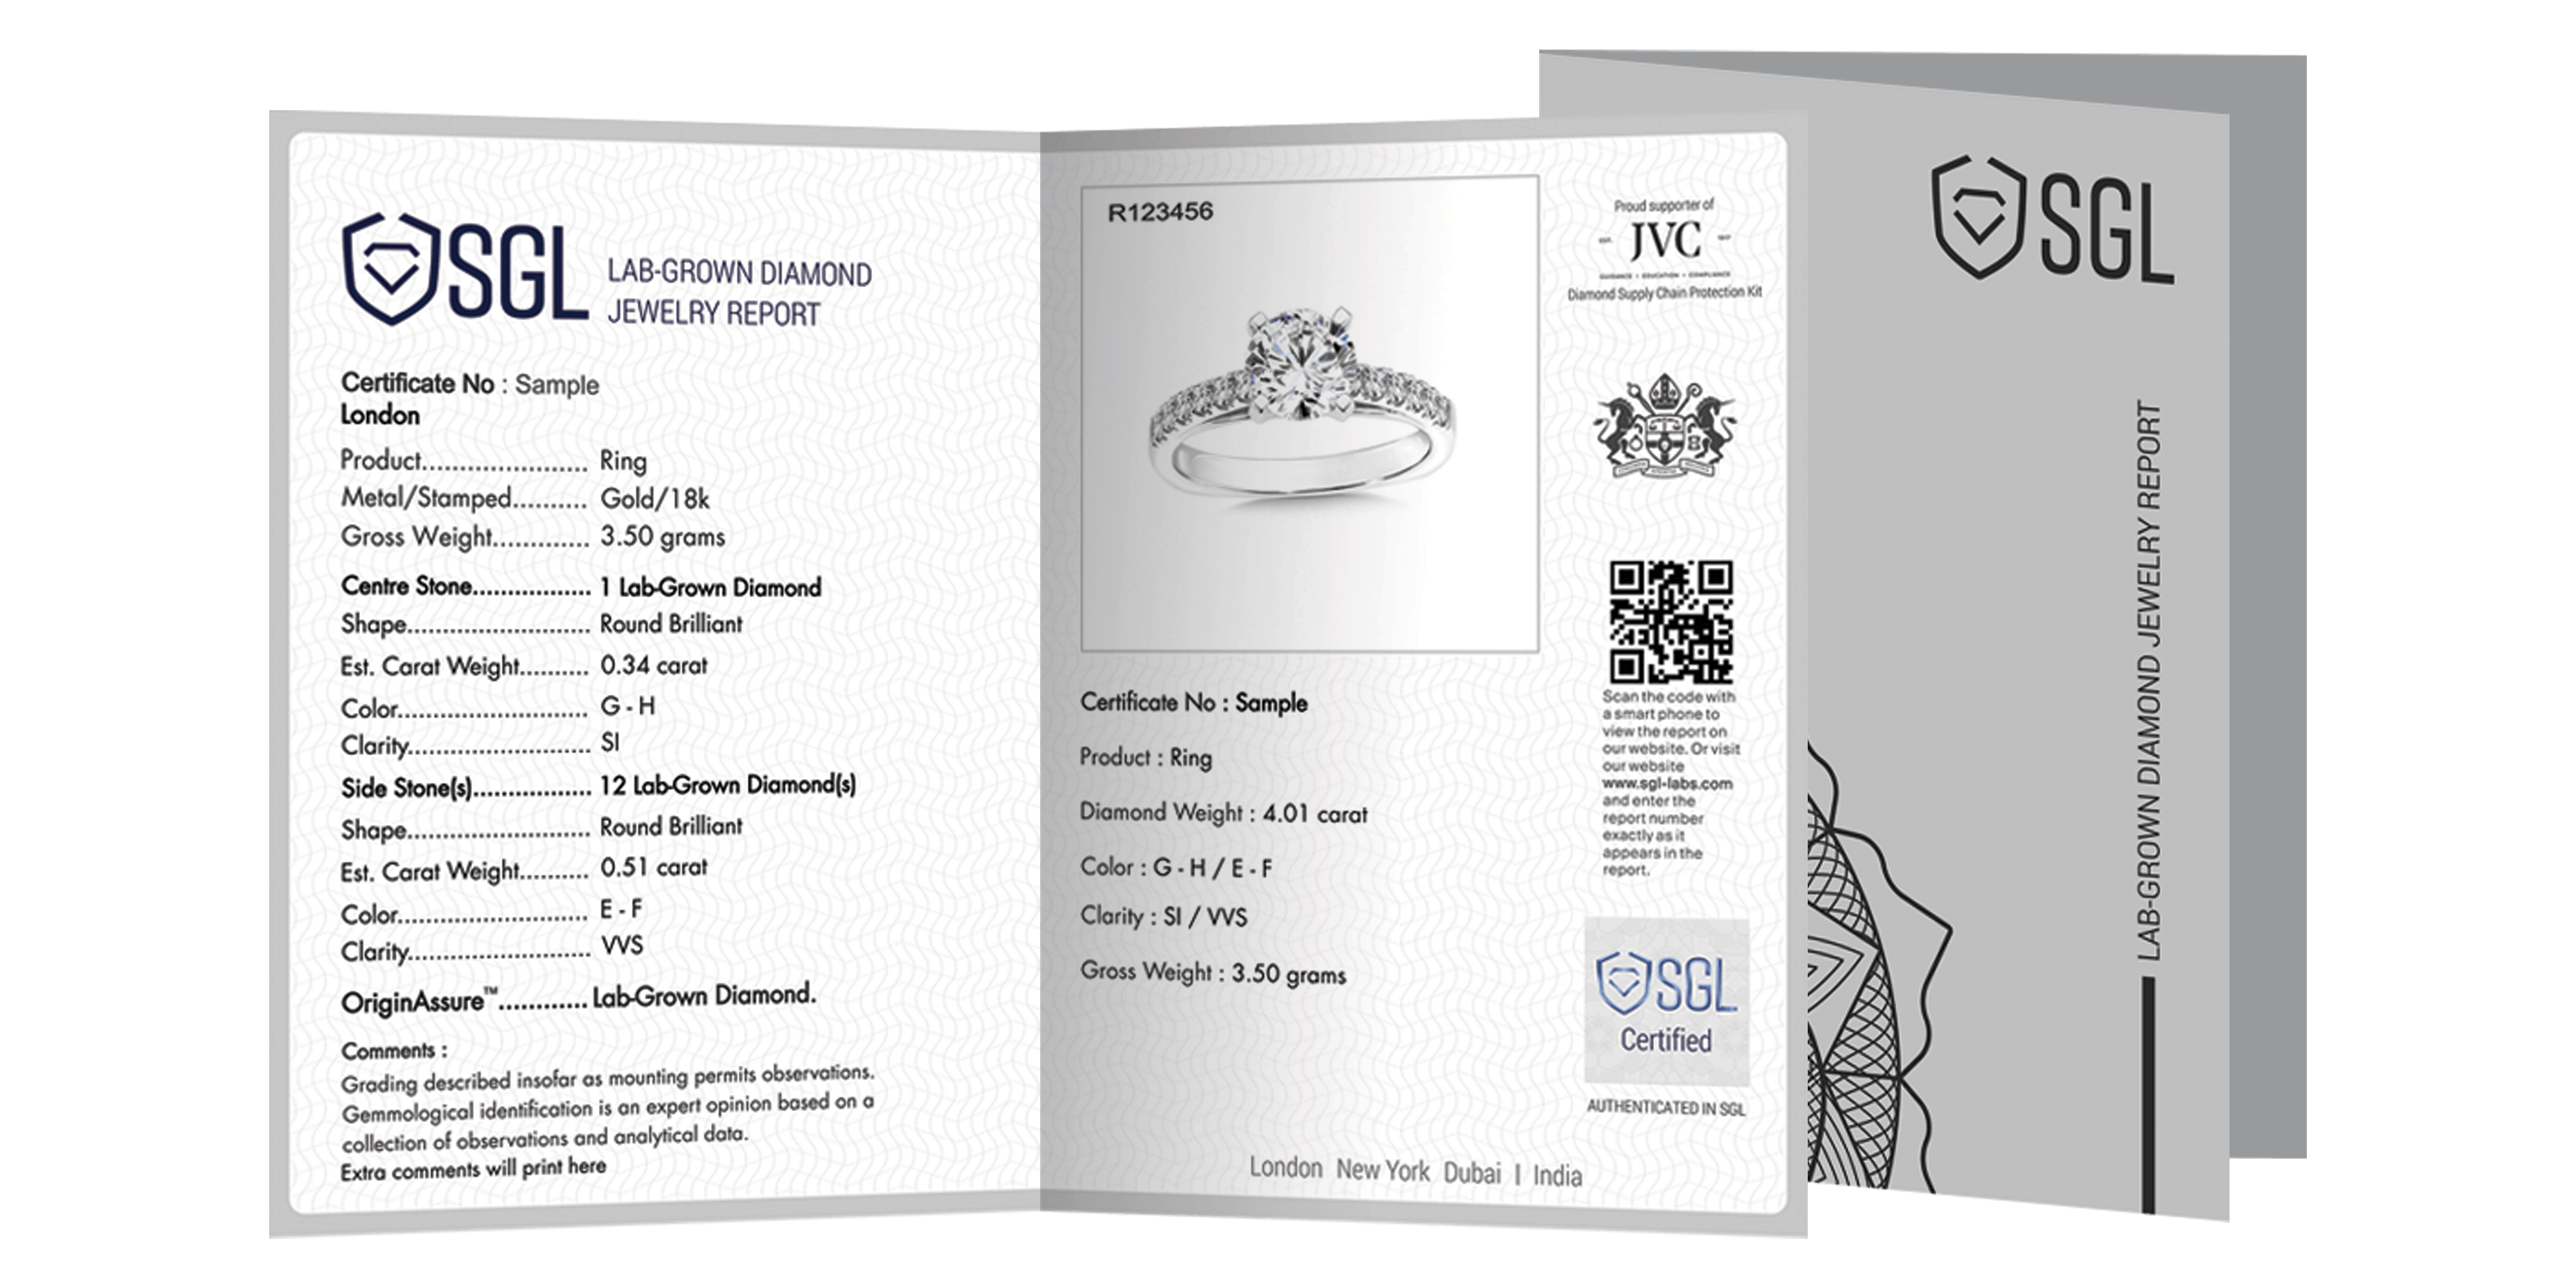 The image is of a sample certificate of lab grown diamond jewellery report by SGL.